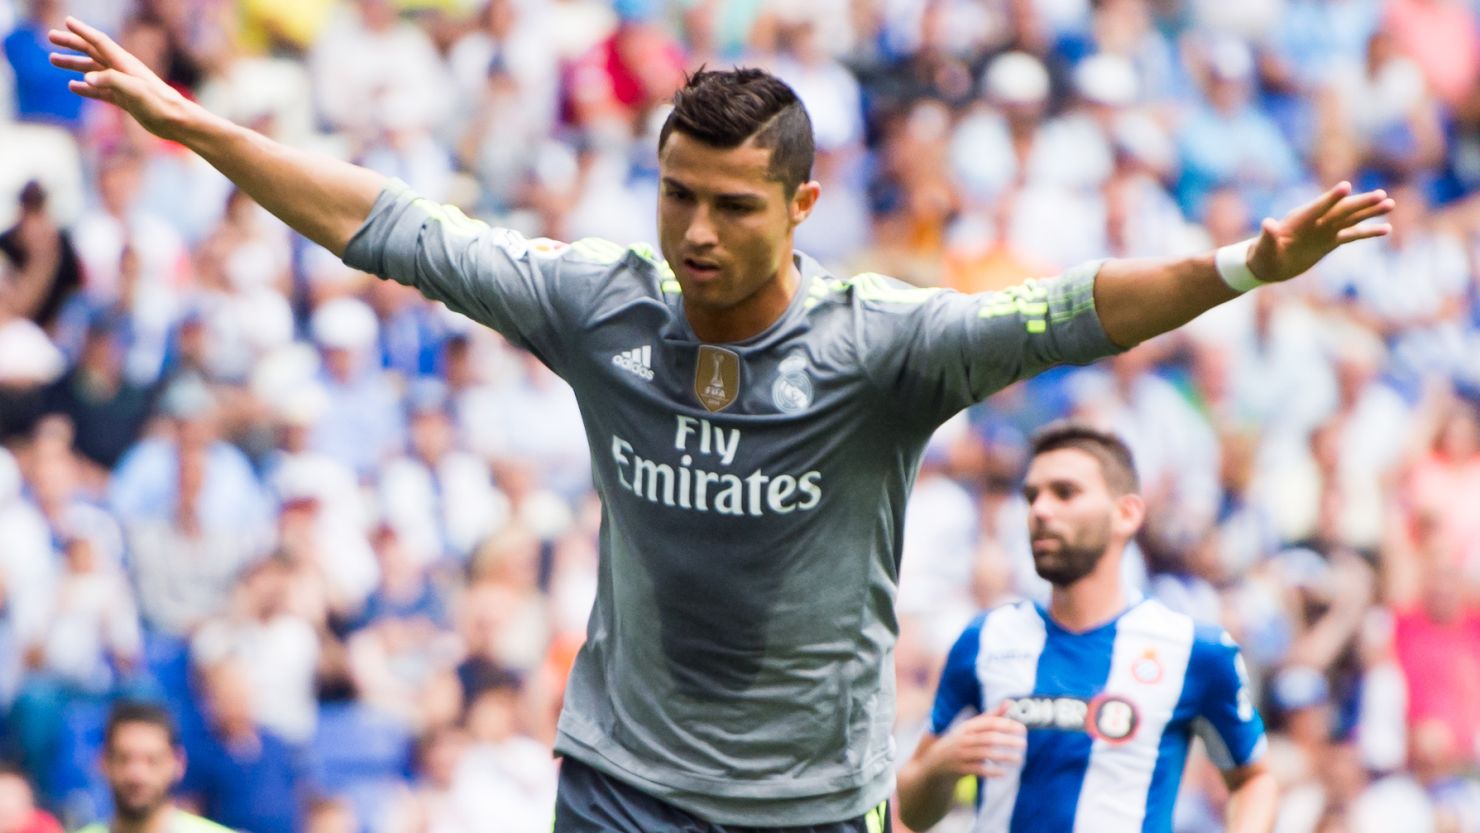 Cristiano Ronaldo set a new Real Madrid scoring record as his team routed Espanyol.